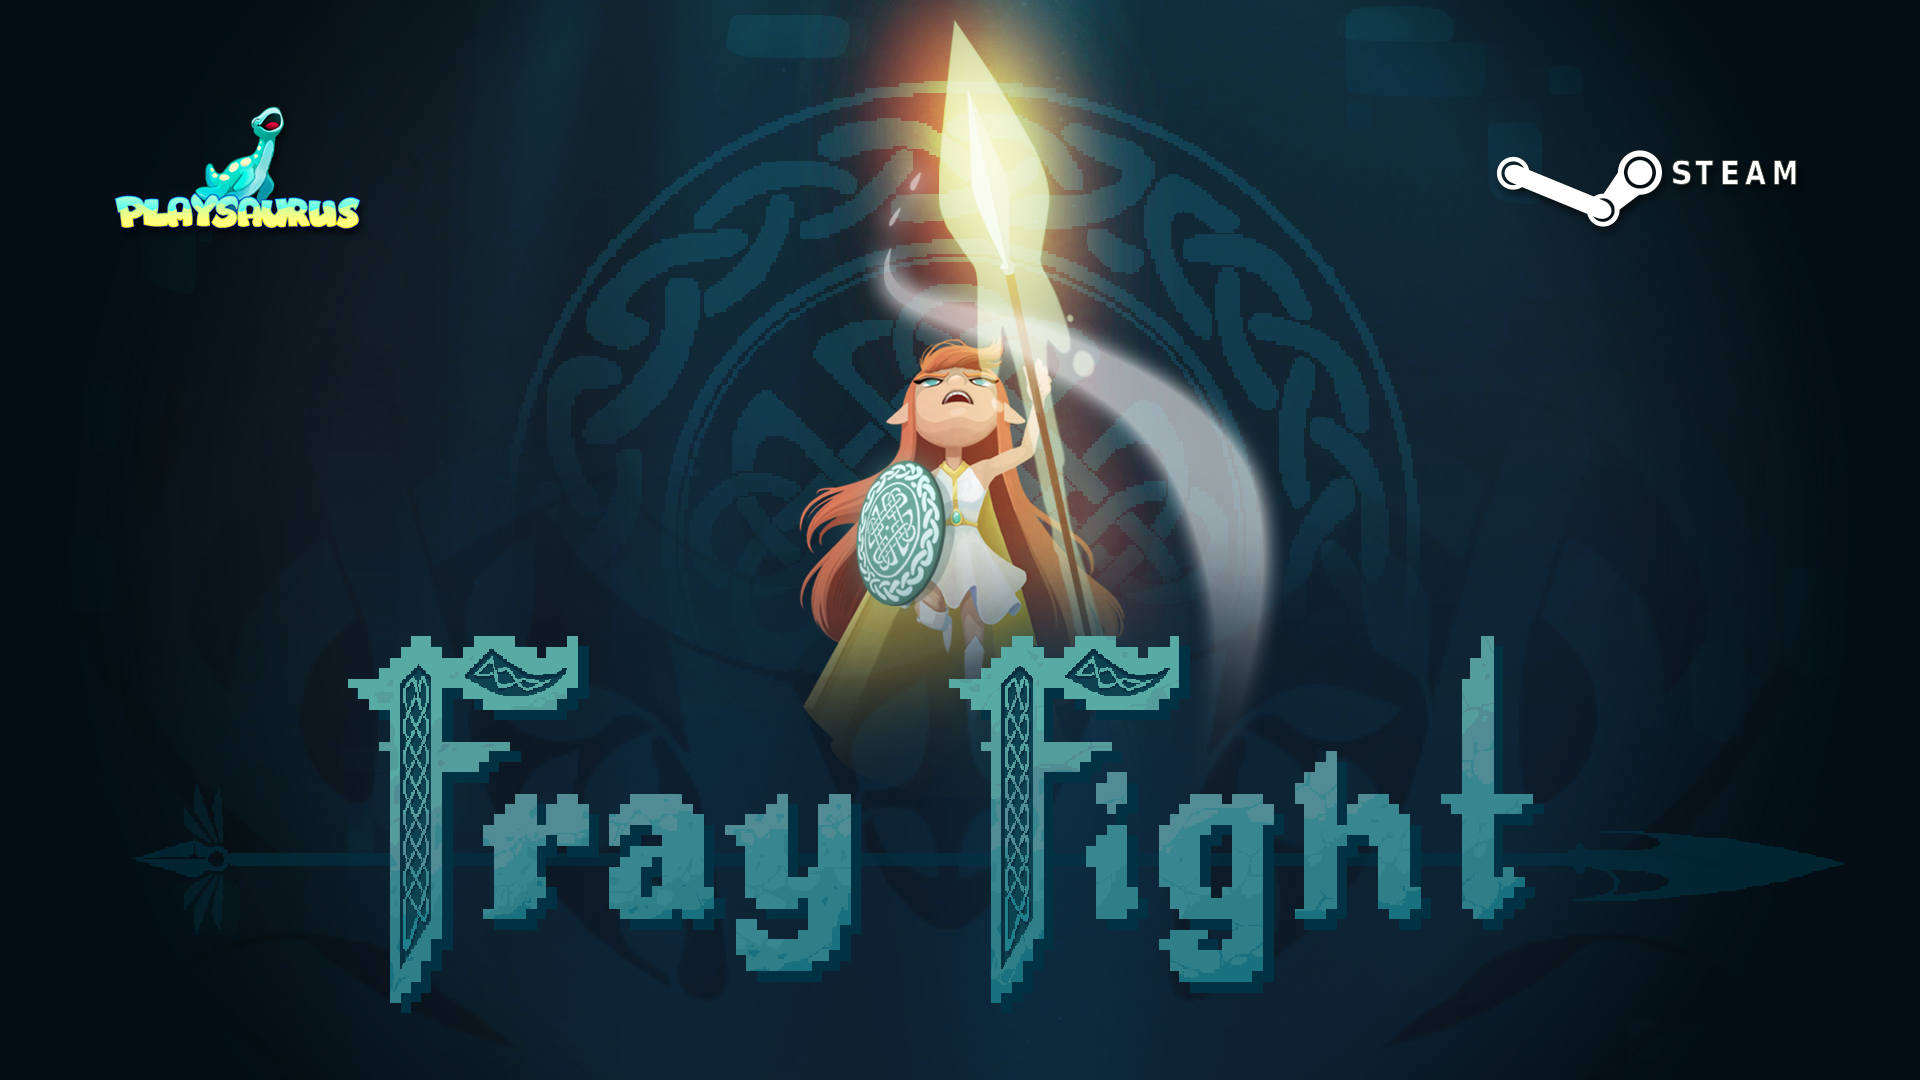 Check out: Fray Fight